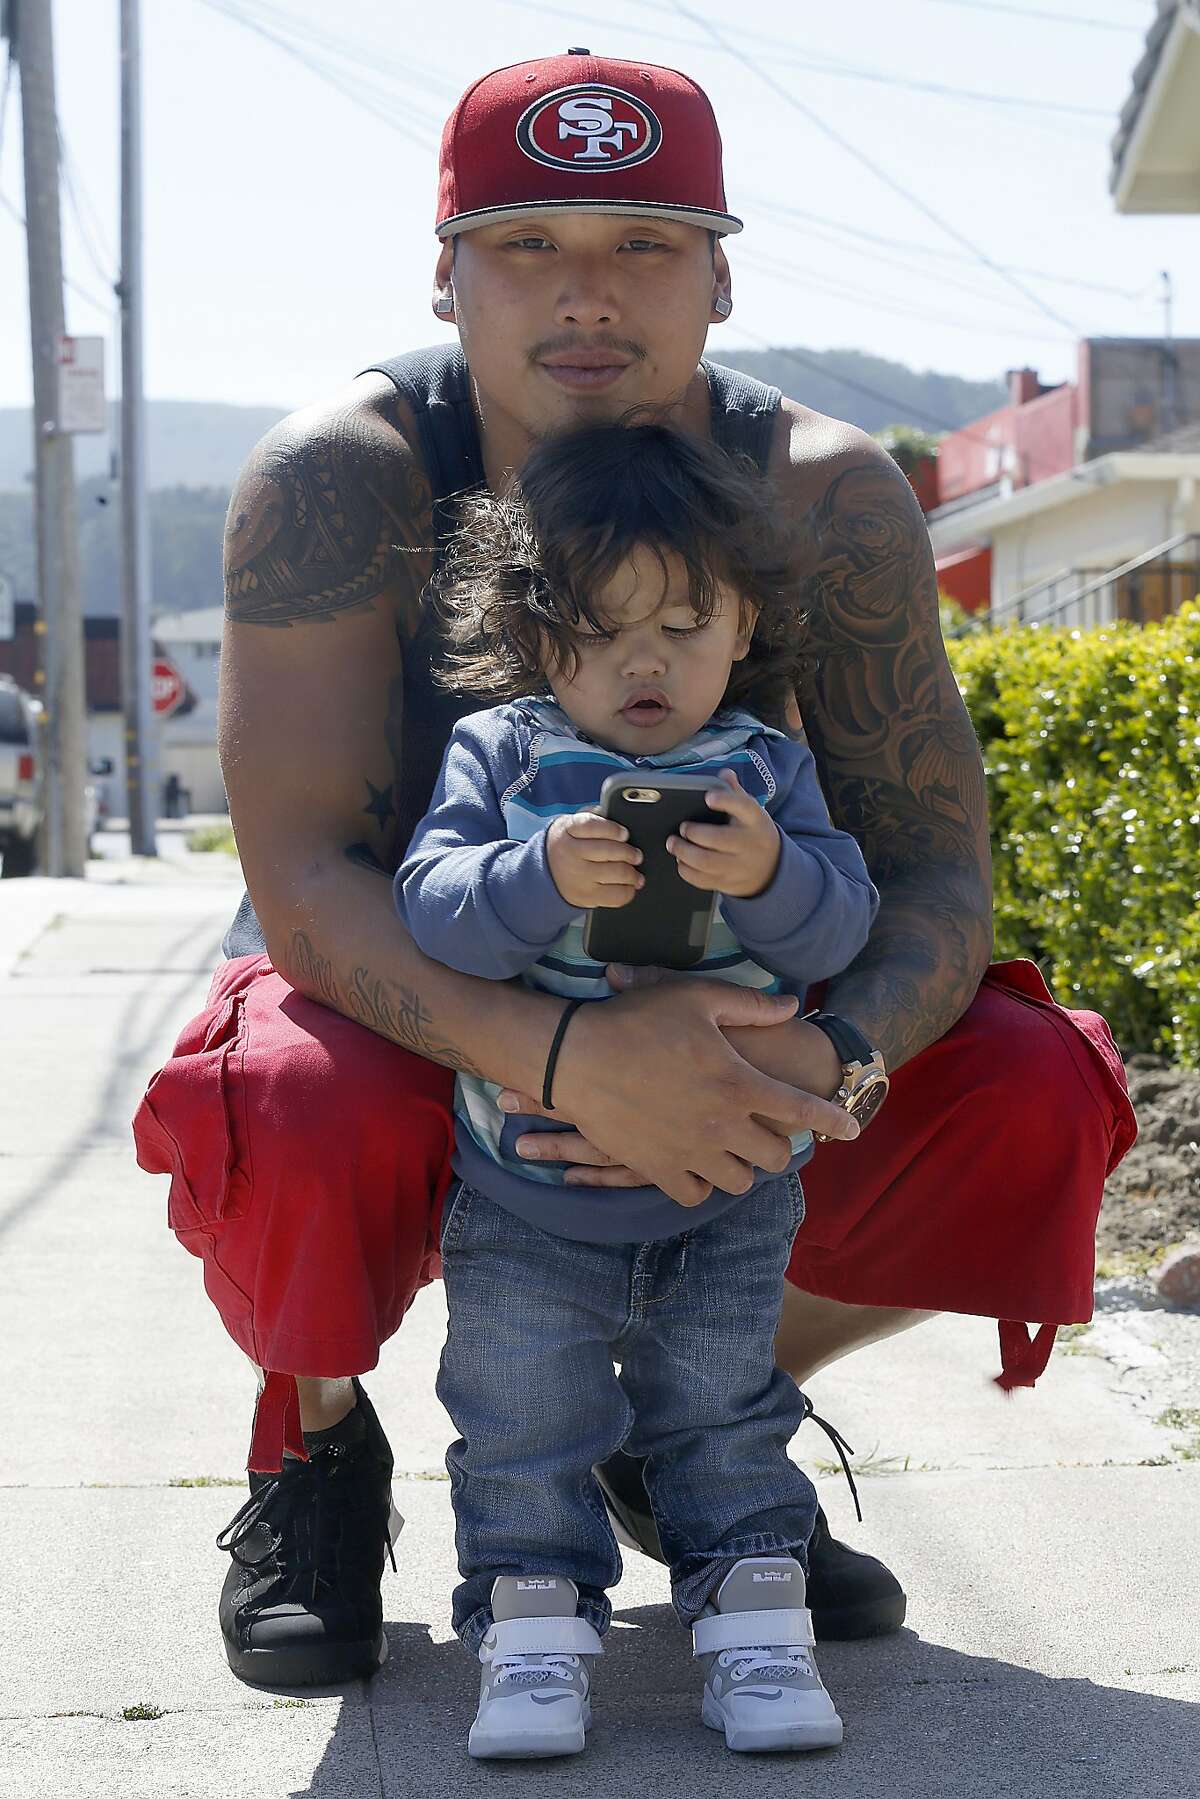 Kevin Yip playing with his 22 month old son, Dominic King Yip in front of his parents' home where he grew up in San Bruno, California, on Friday, April 3, 2015.